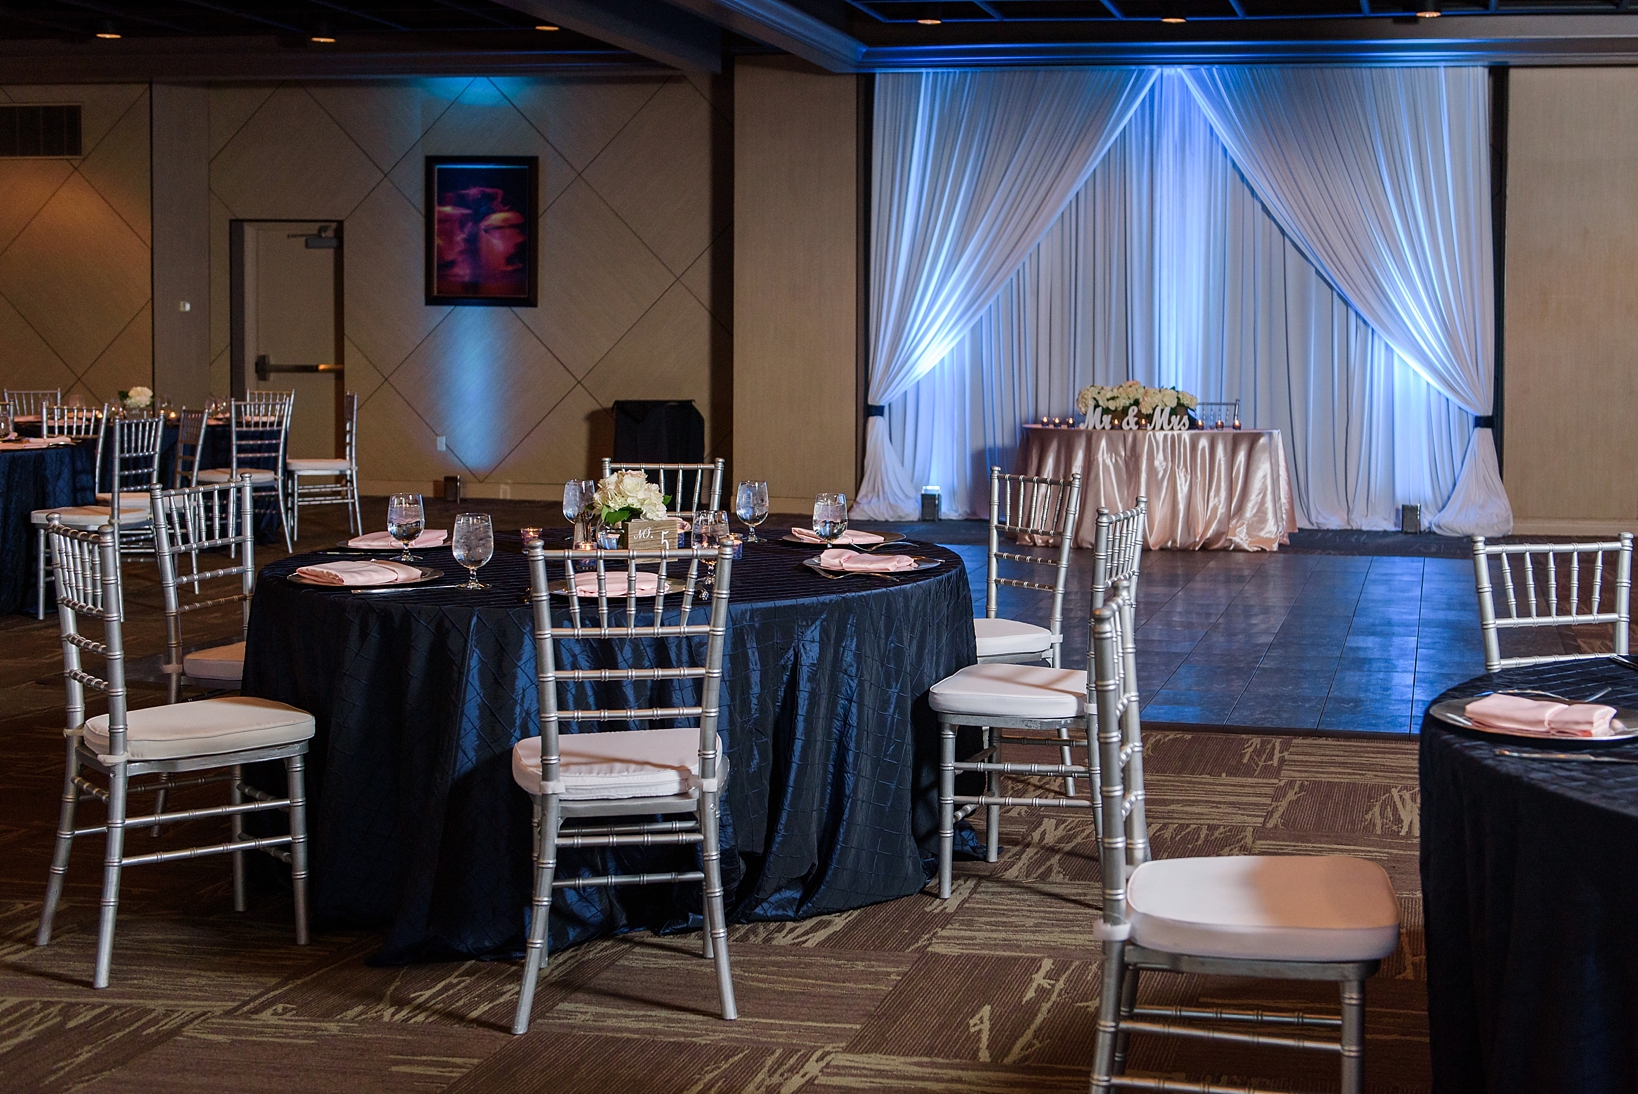 Reception space with blue uplighting along the drapes and chivari chairs